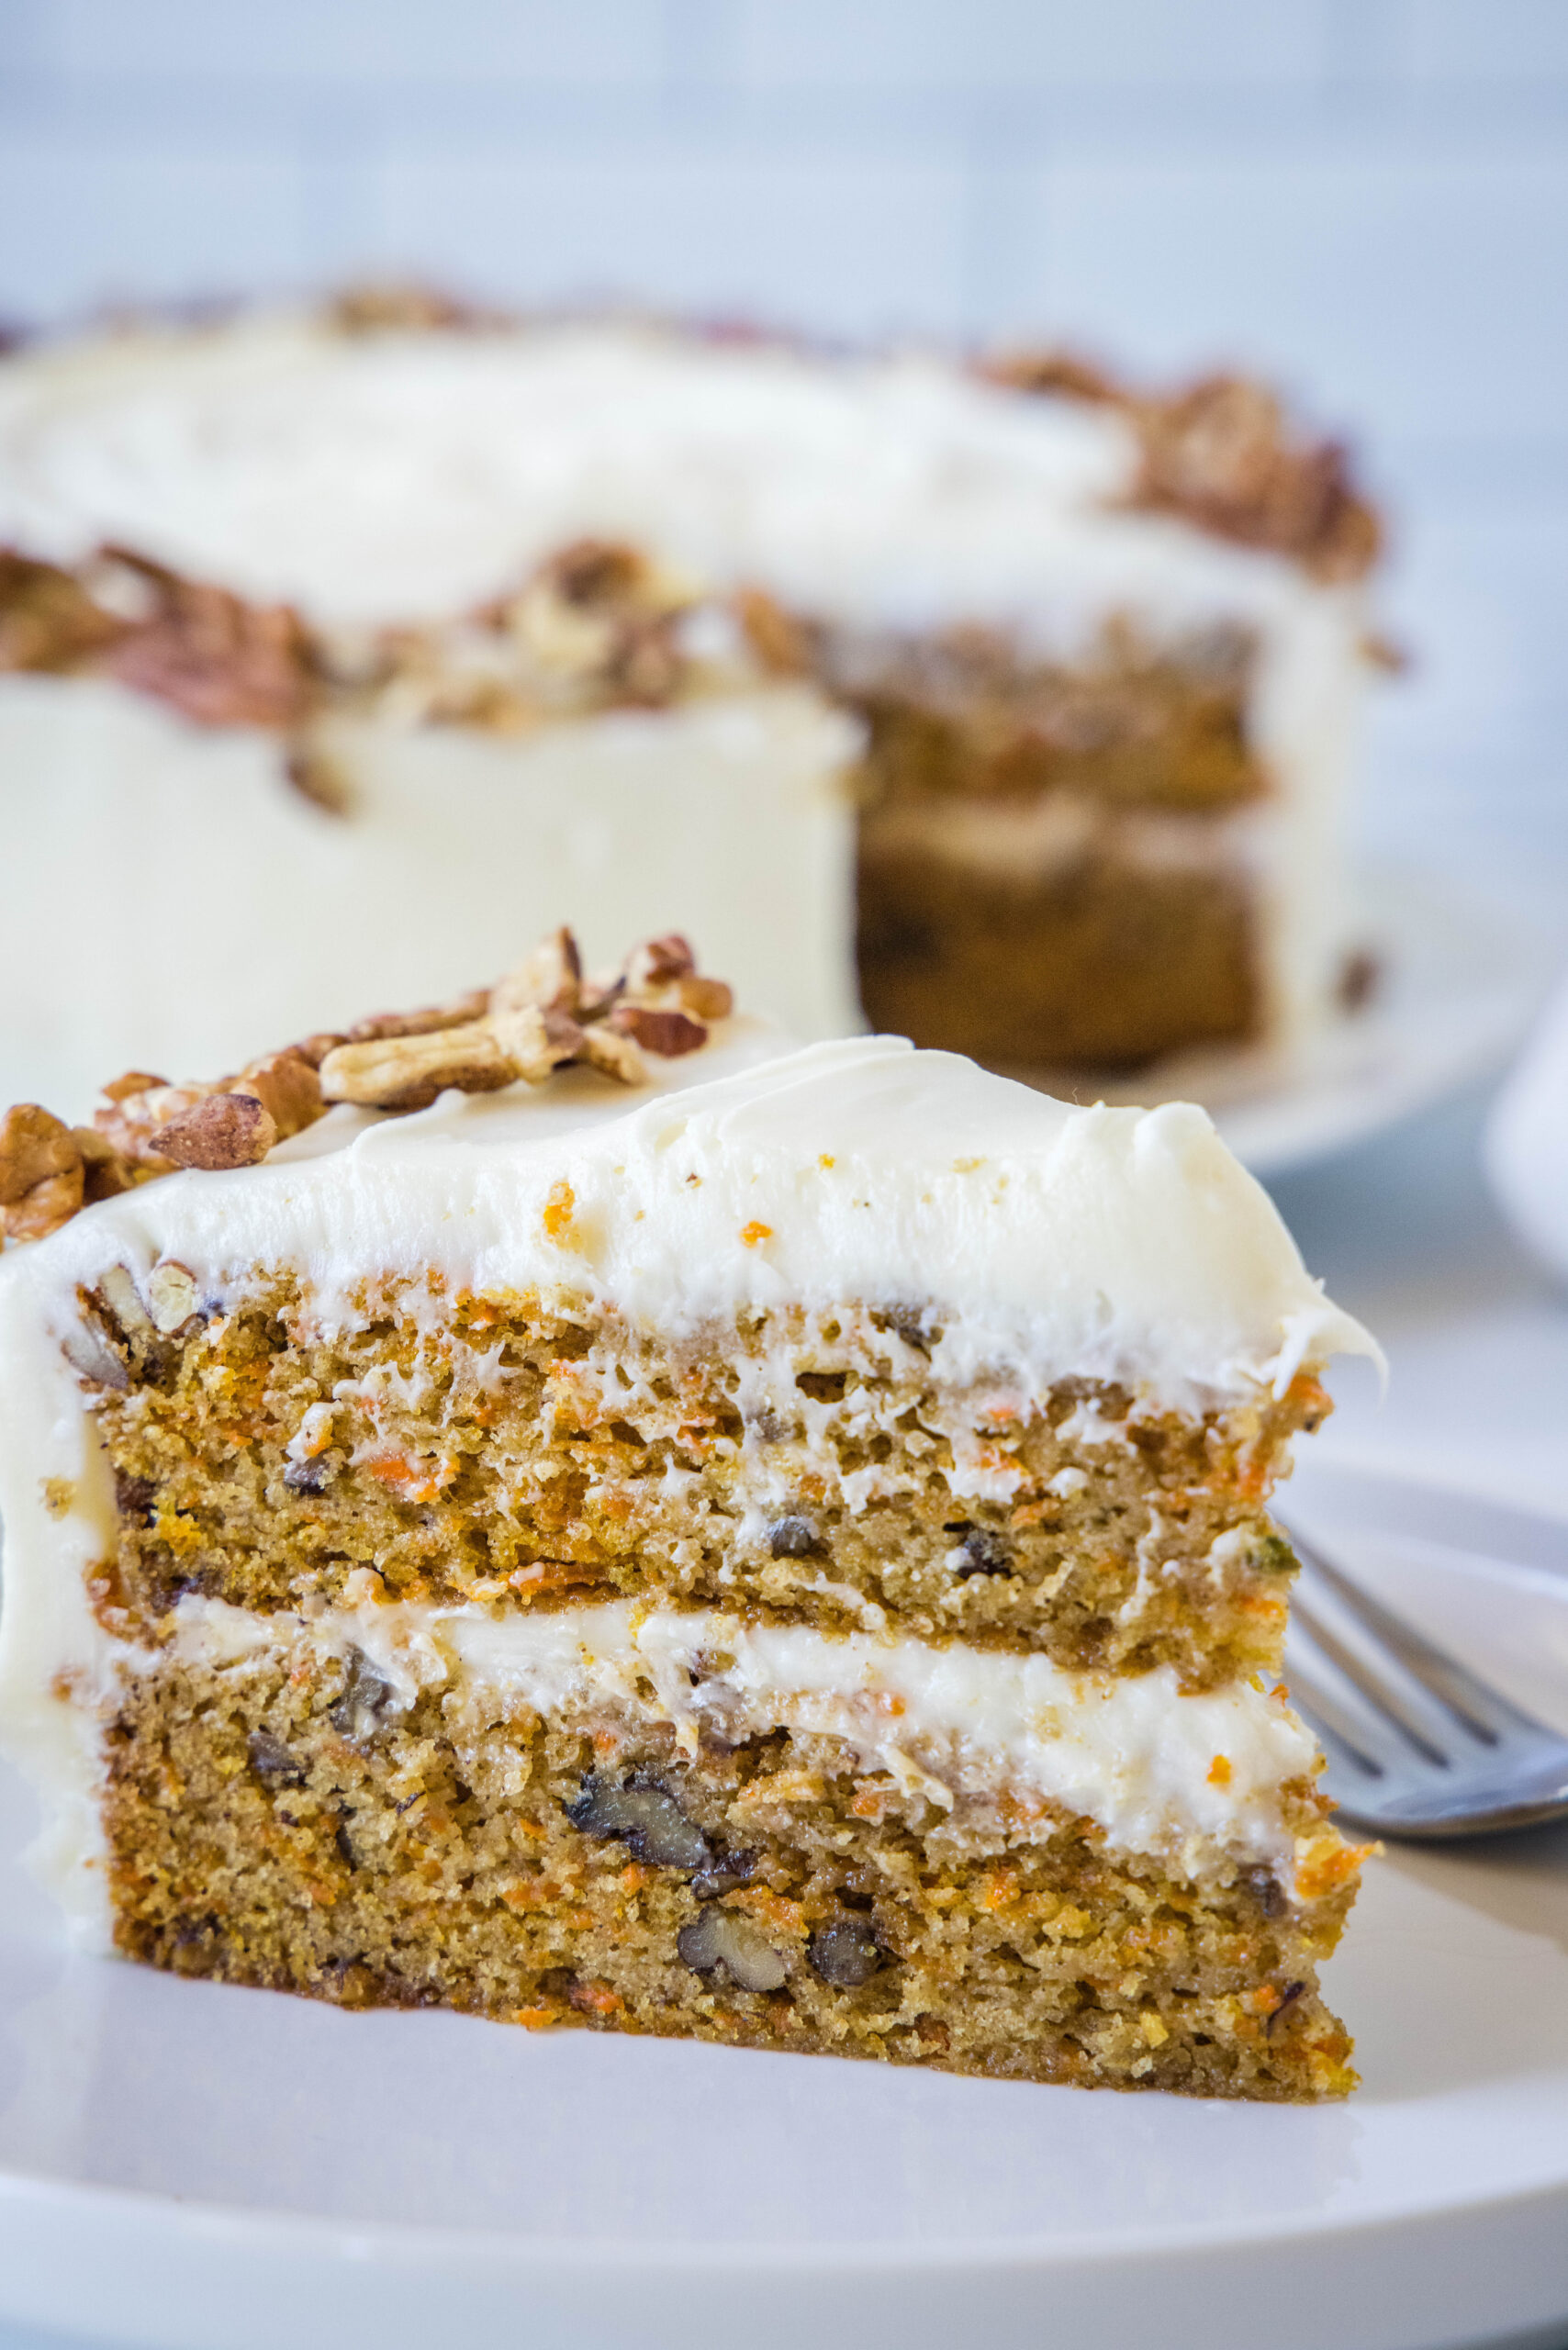 A slice of frosted carrot cake on a white plate next to a fork, with the rest of the cake in the background.